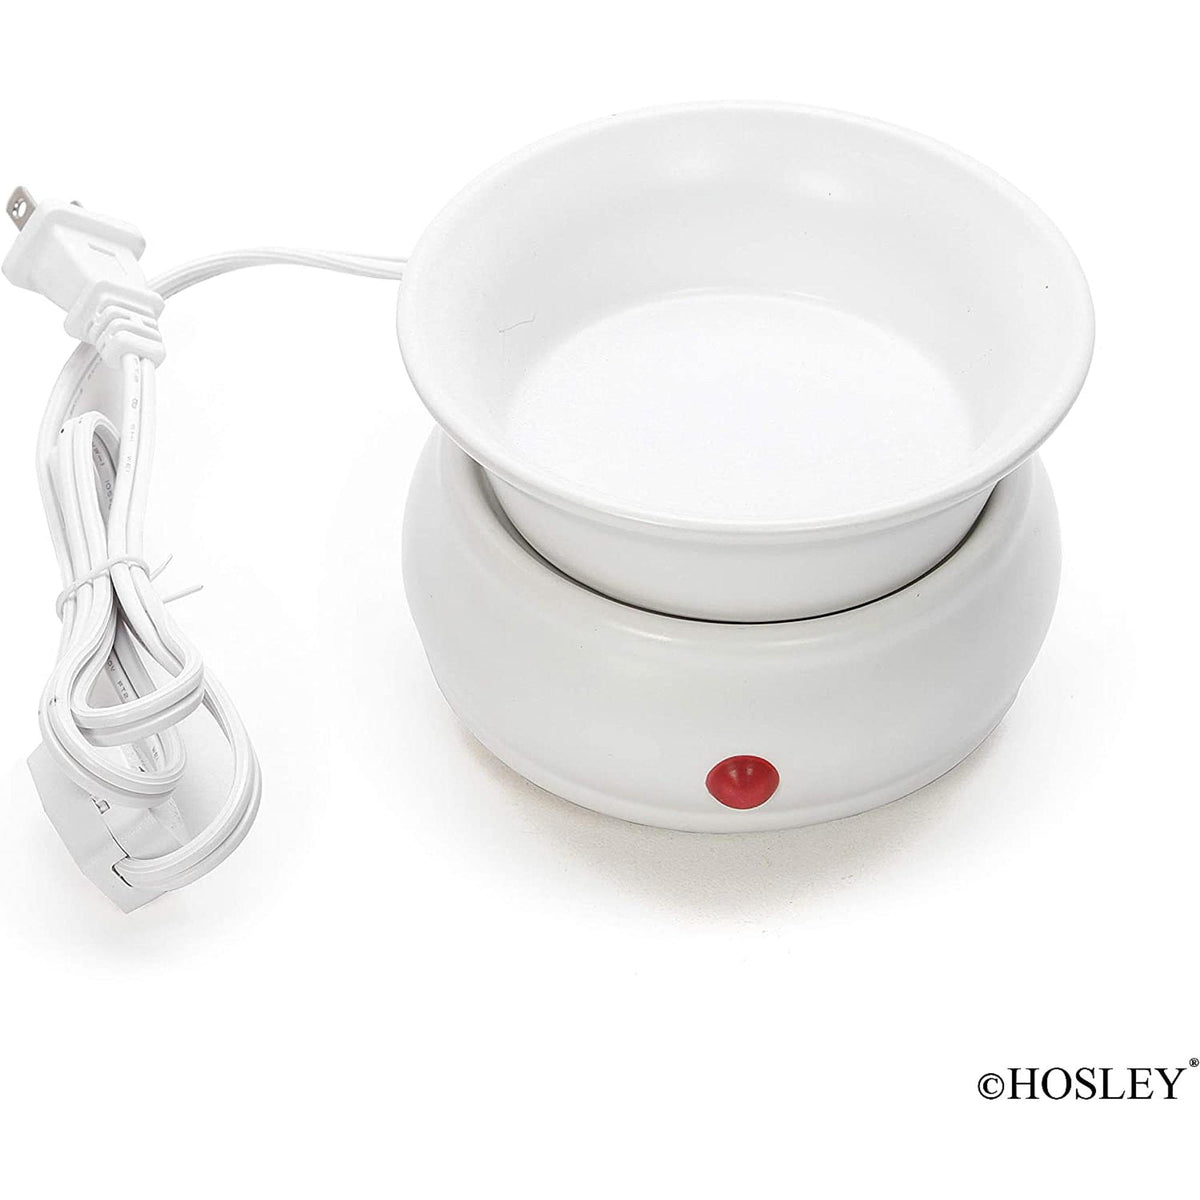 HOSLEY®  Ceramic Electric Candle Warmer, White  Color